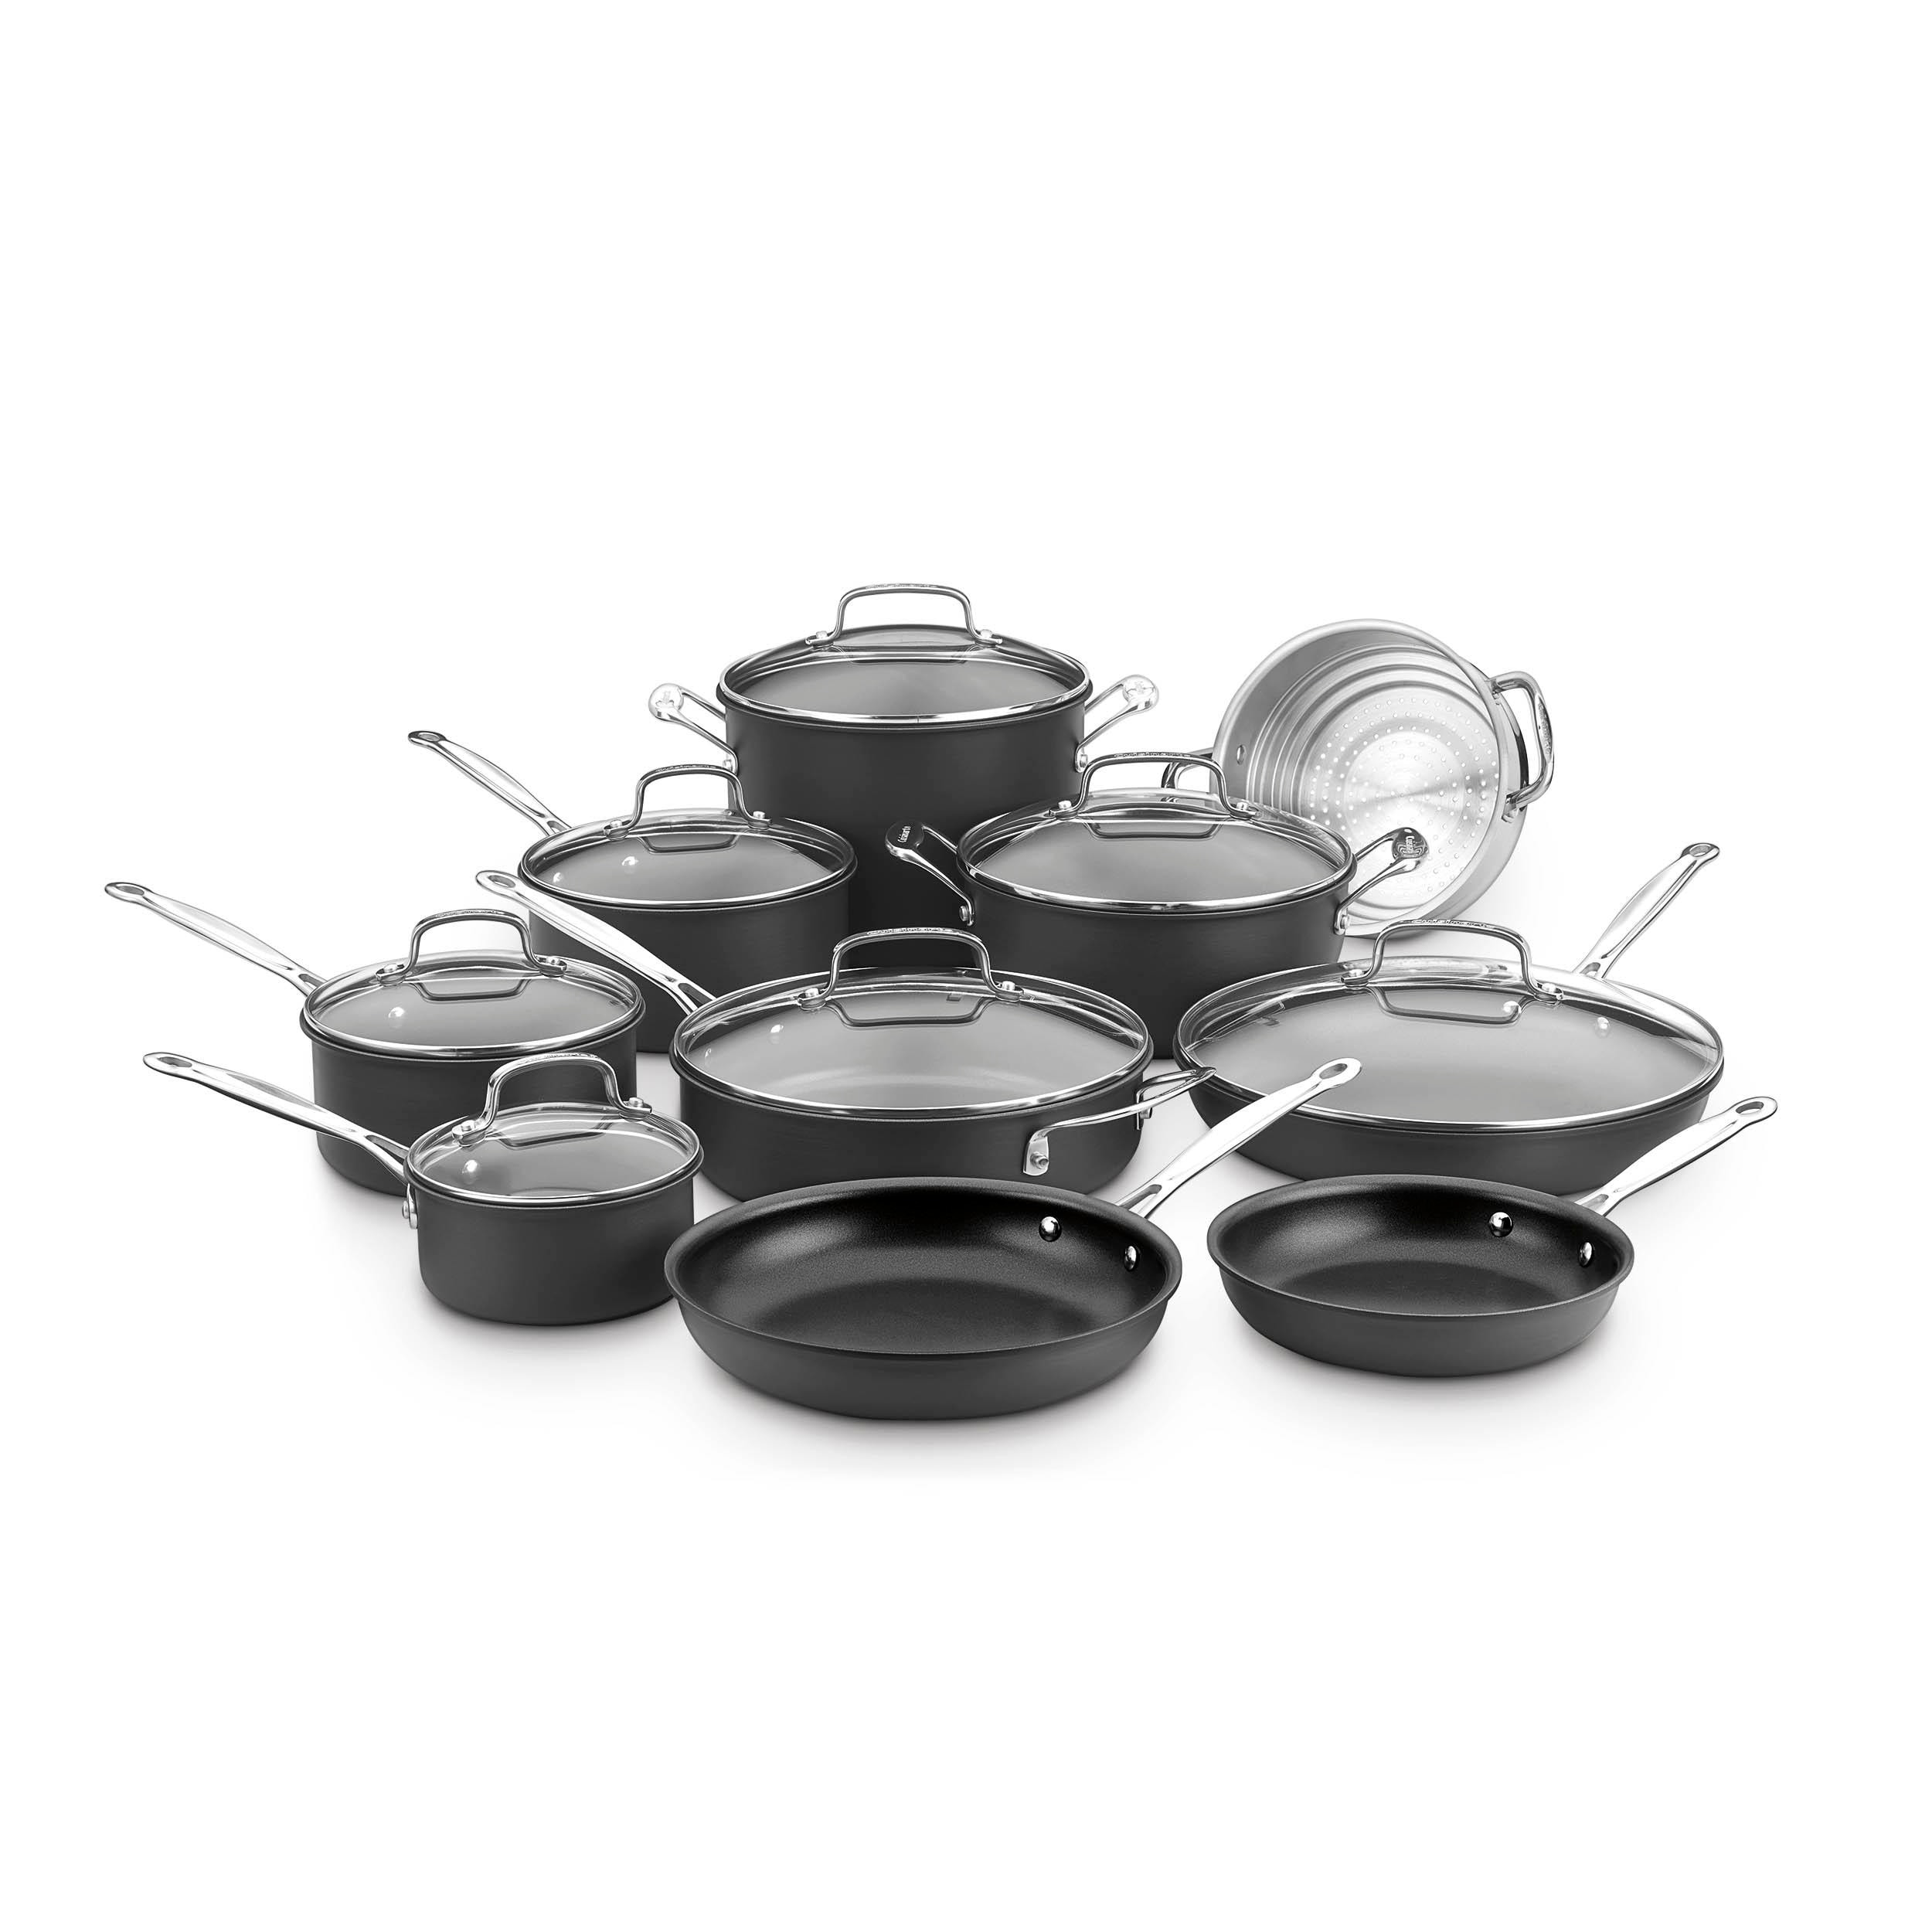 Cuisinart Chef's Classic Nonstick Hard Anodized 17-piece Cookware